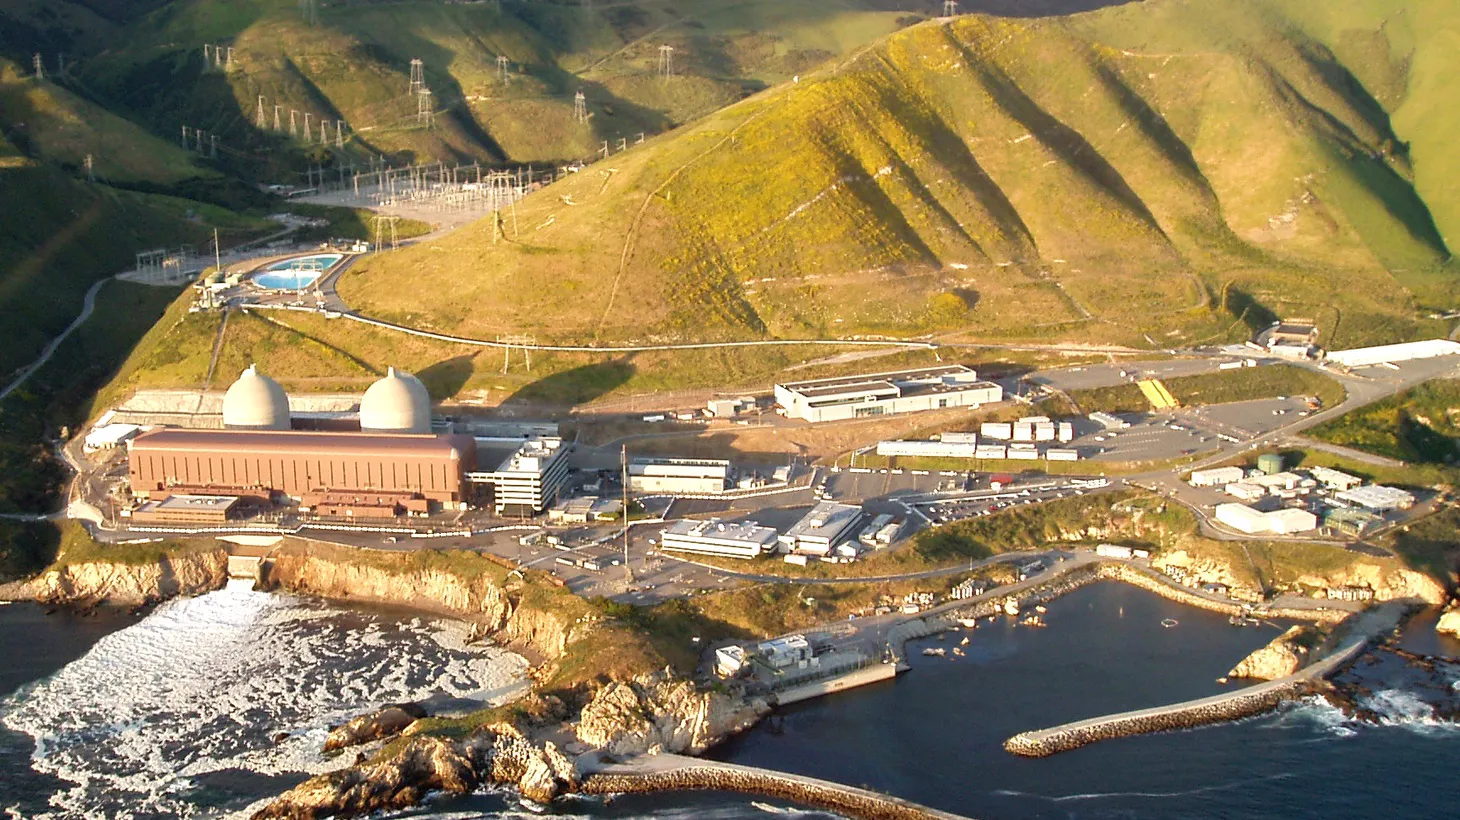 The state’s last operating nuclear power plant is scheduled to shut down in 2025, but calls to keep Diablo Canyon running are getting louder because of the clean energy it produces.